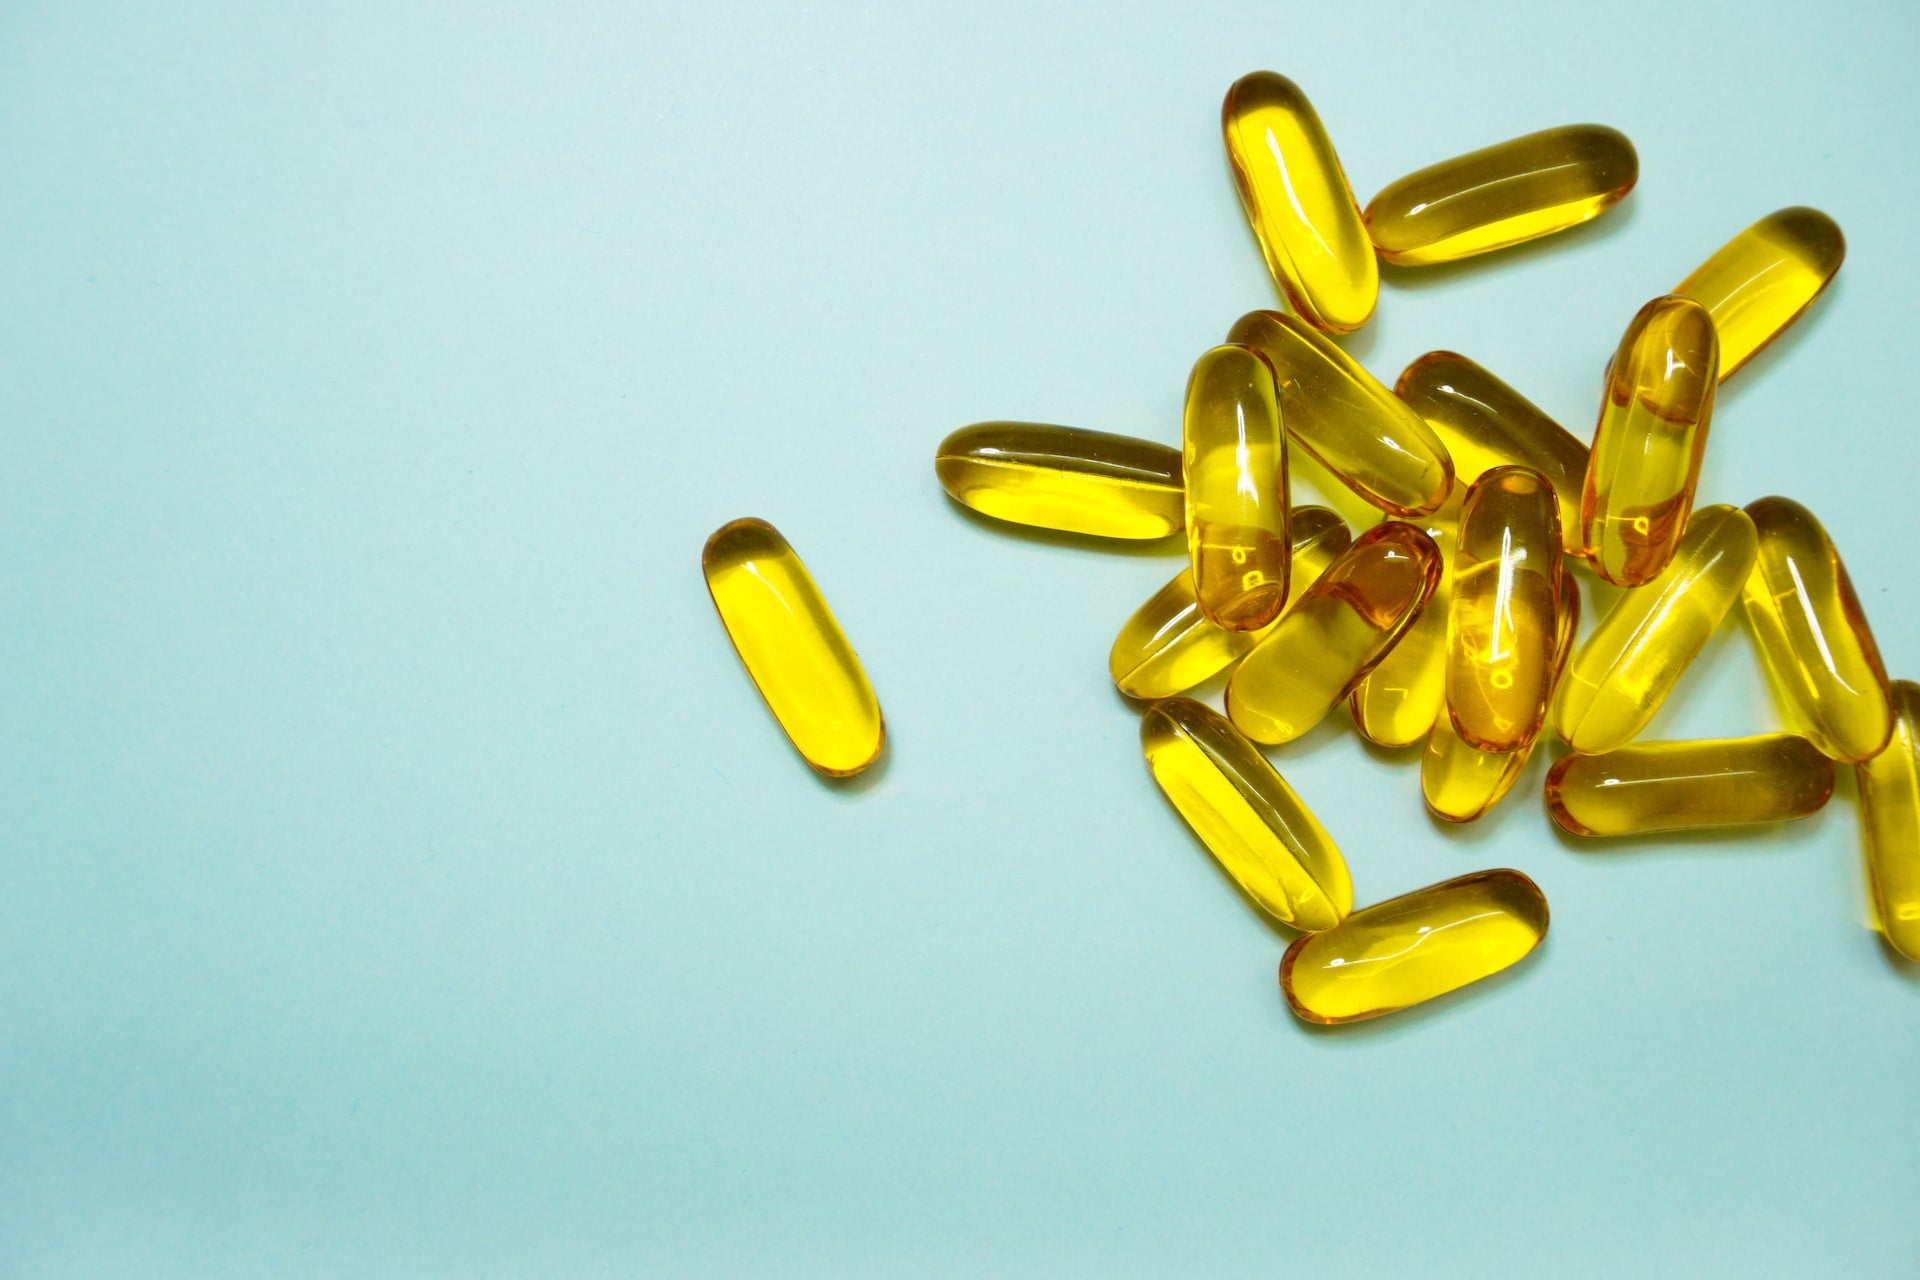 Does Fish Oil Supplementation Impact Recovery?